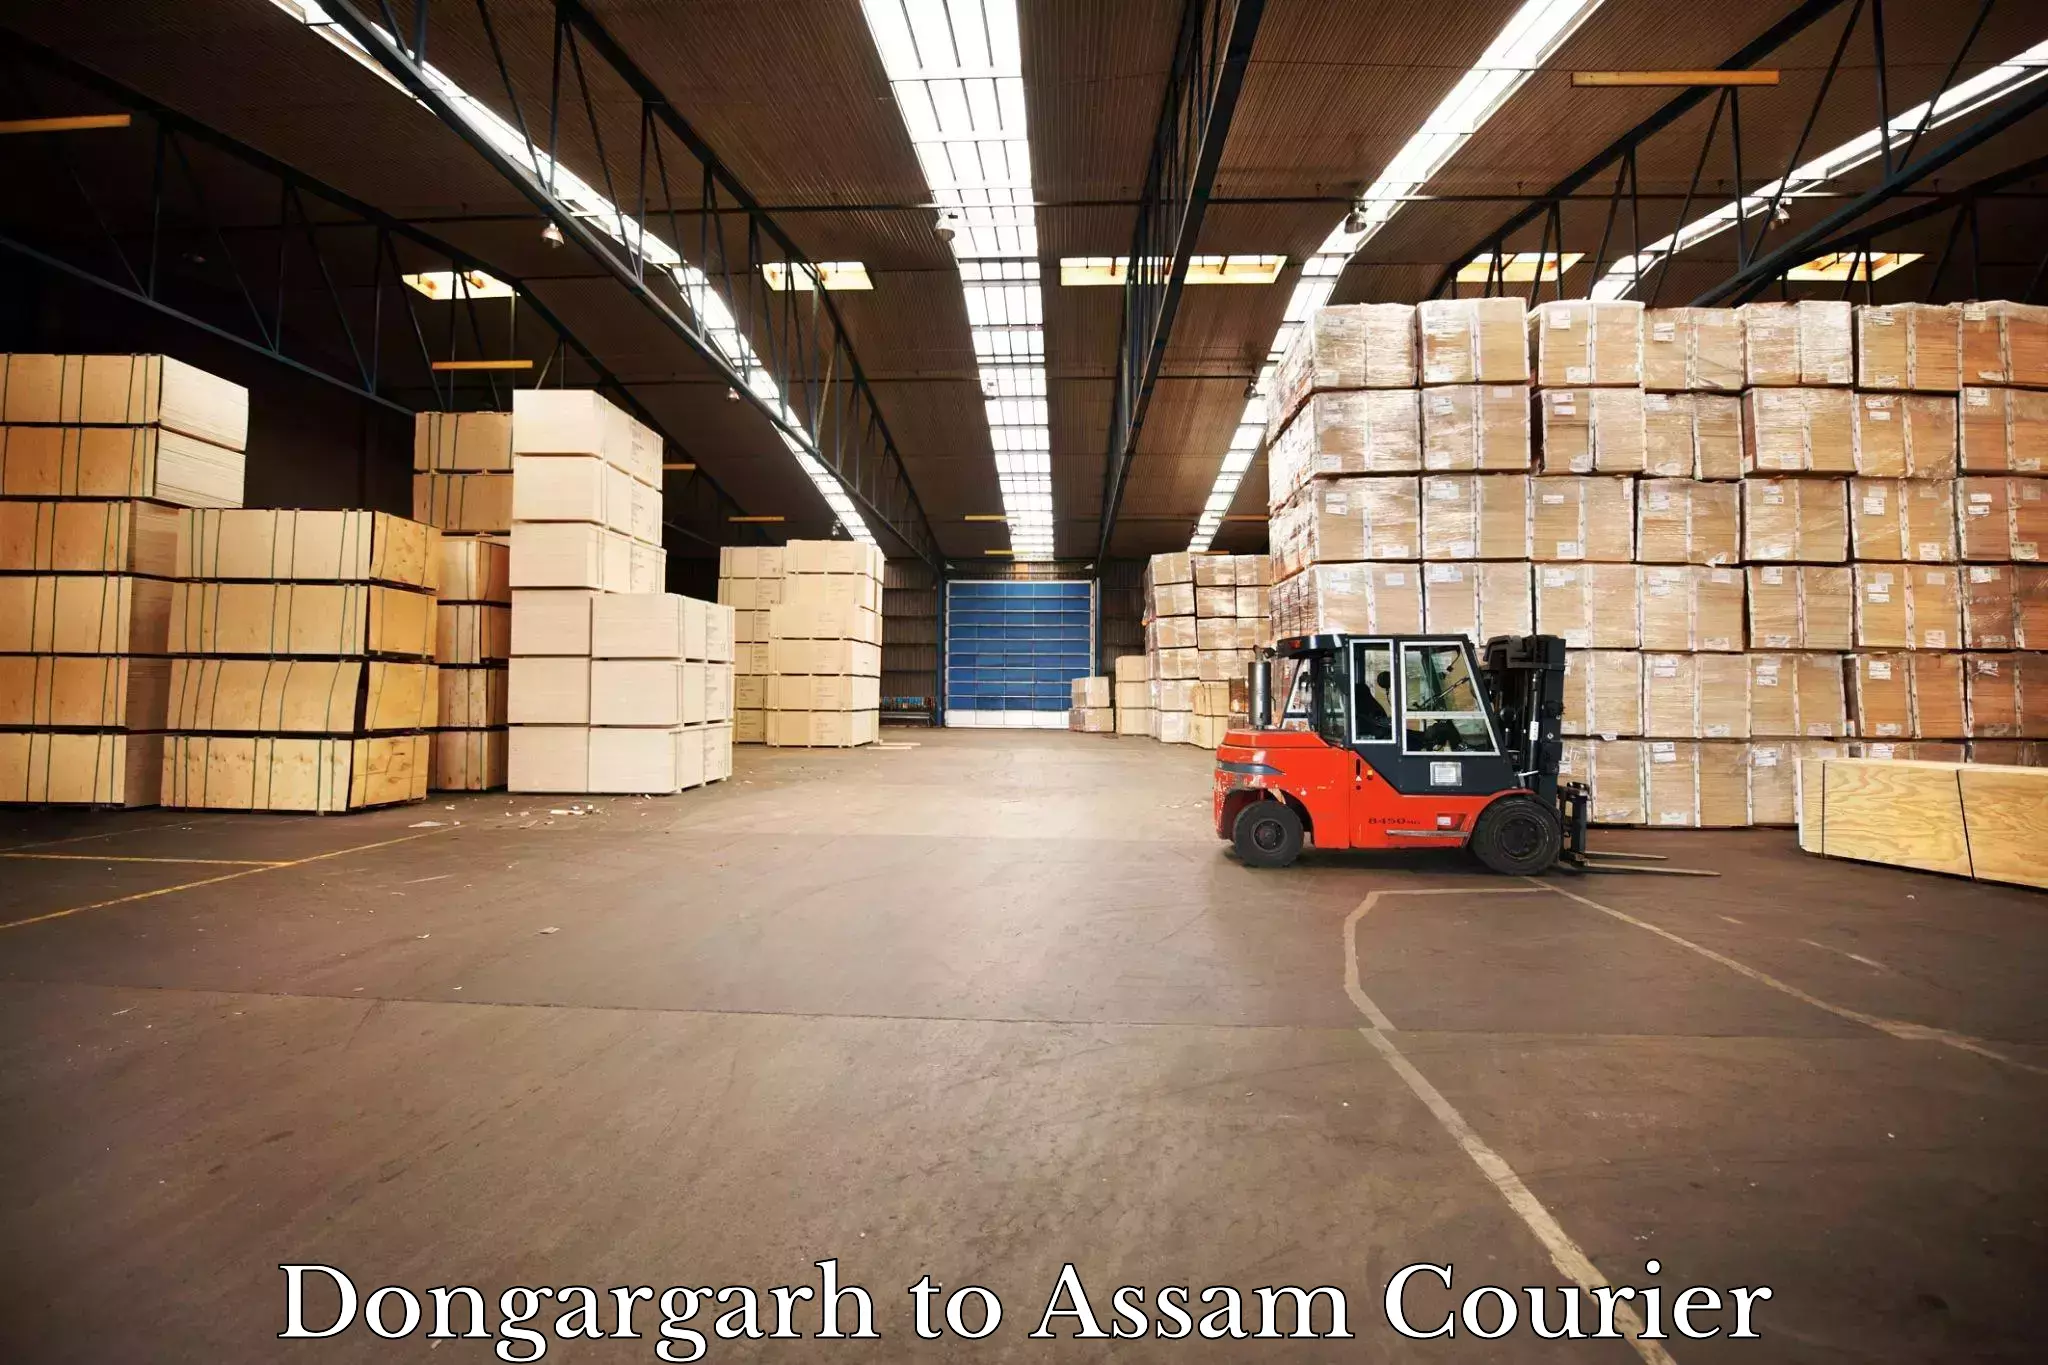 State-of-the-art courier technology Dongargarh to Lakhipur